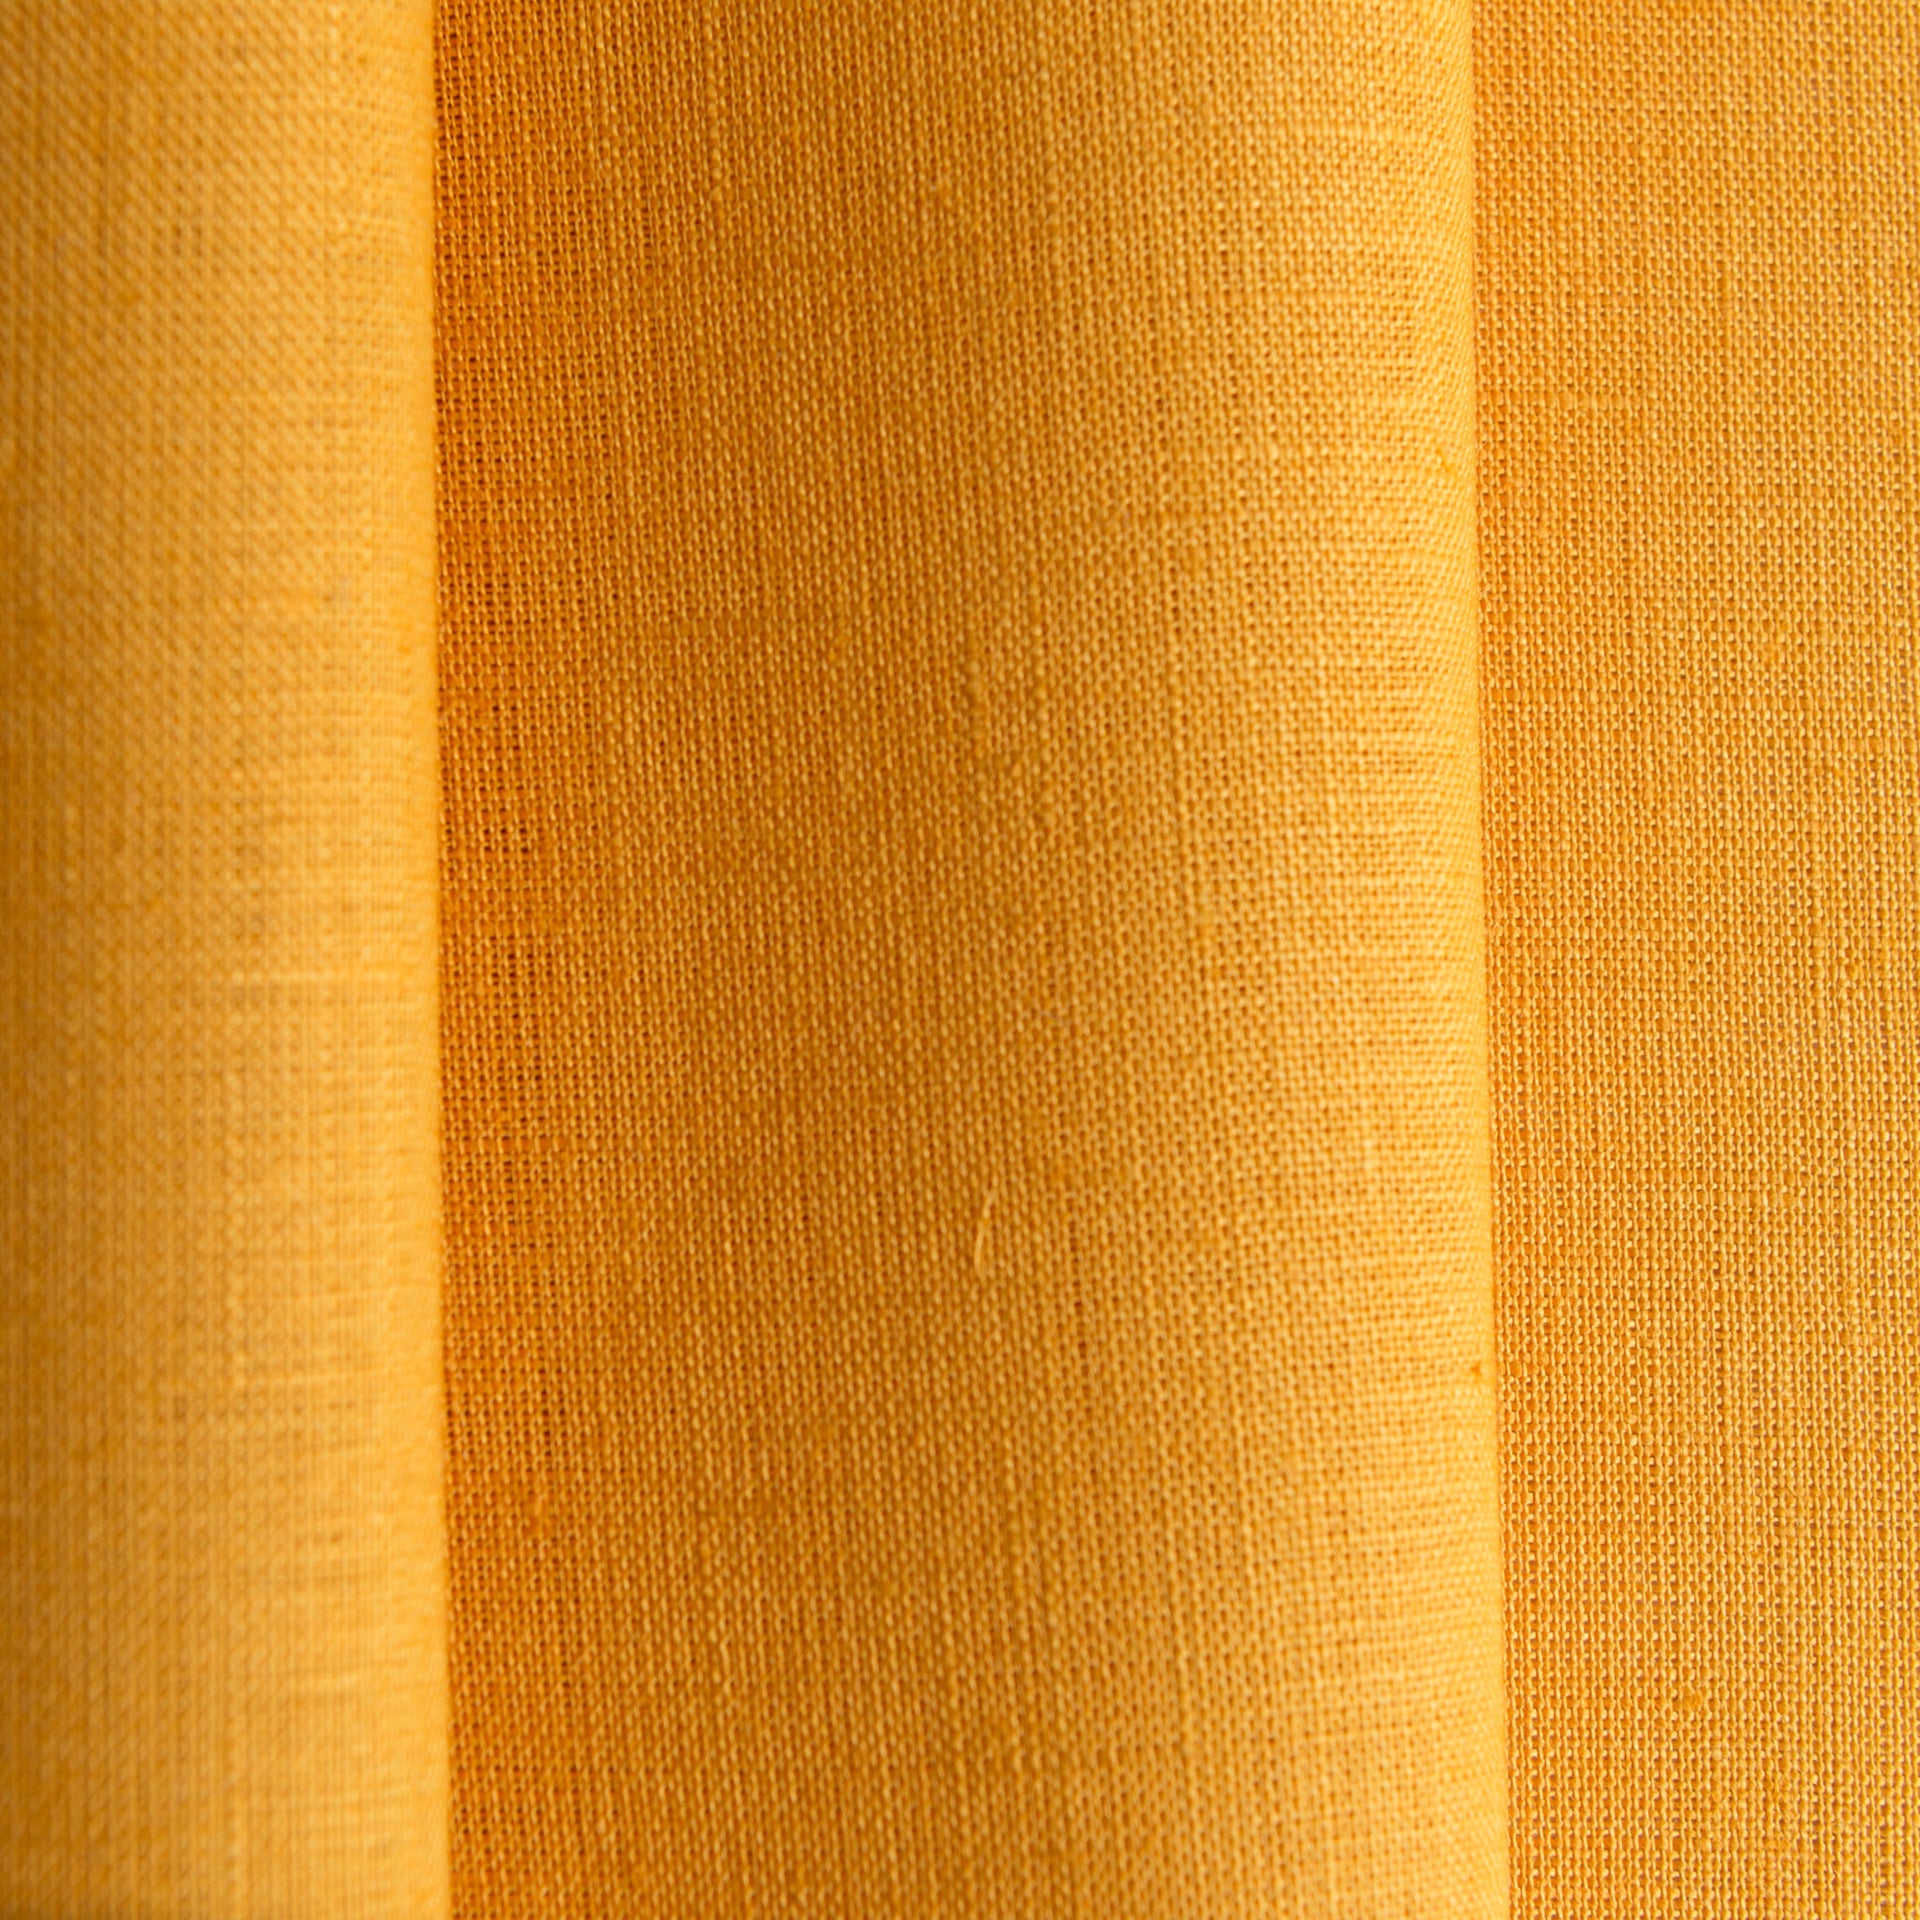 Mustard Yellow Linen Fabric by the Meter - 100% French Natural - Width 133 cm, 267 cm